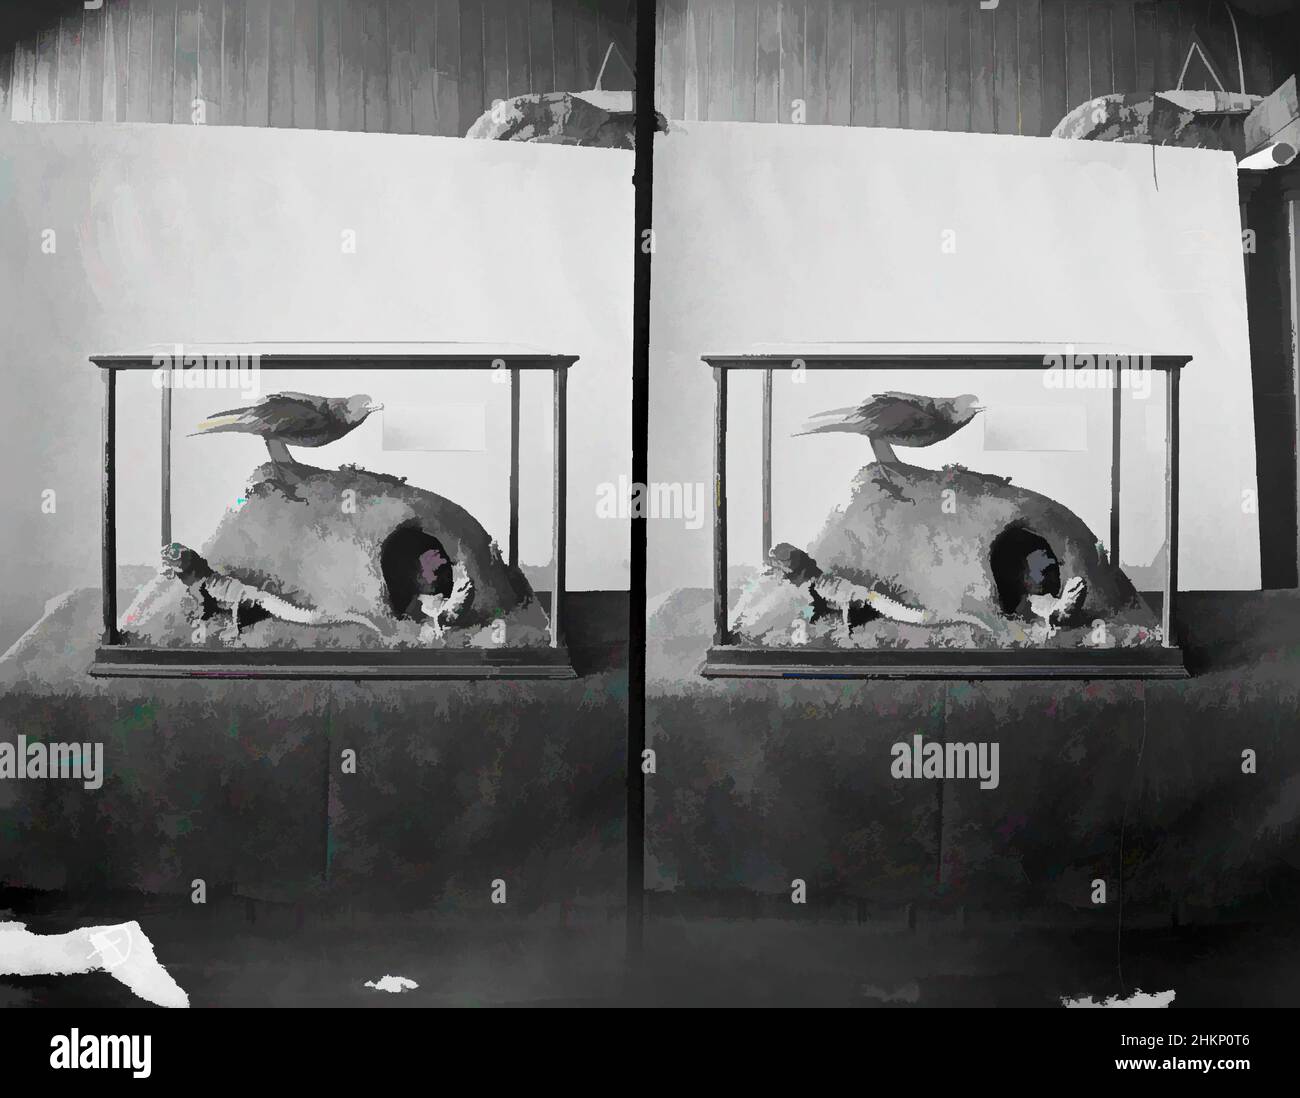 Art inspired by [Tuatara & Mutton Birds], Burton Brothers studio, photography studio, circa 1889, Dunedin, black-and-white photography, Stereo view of stuffed animals in a glass case. Sign reads 'Tuatara Male & Female (Hattakia Punetata) and Mutton birds, Classic works modernized by Artotop with a splash of modernity. Shapes, color and value, eye-catching visual impact on art. Emotions through freedom of artworks in a contemporary way. A timeless message pursuing a wildly creative new direction. Artists turning to the digital medium and creating the Artotop NFT Stock Photo